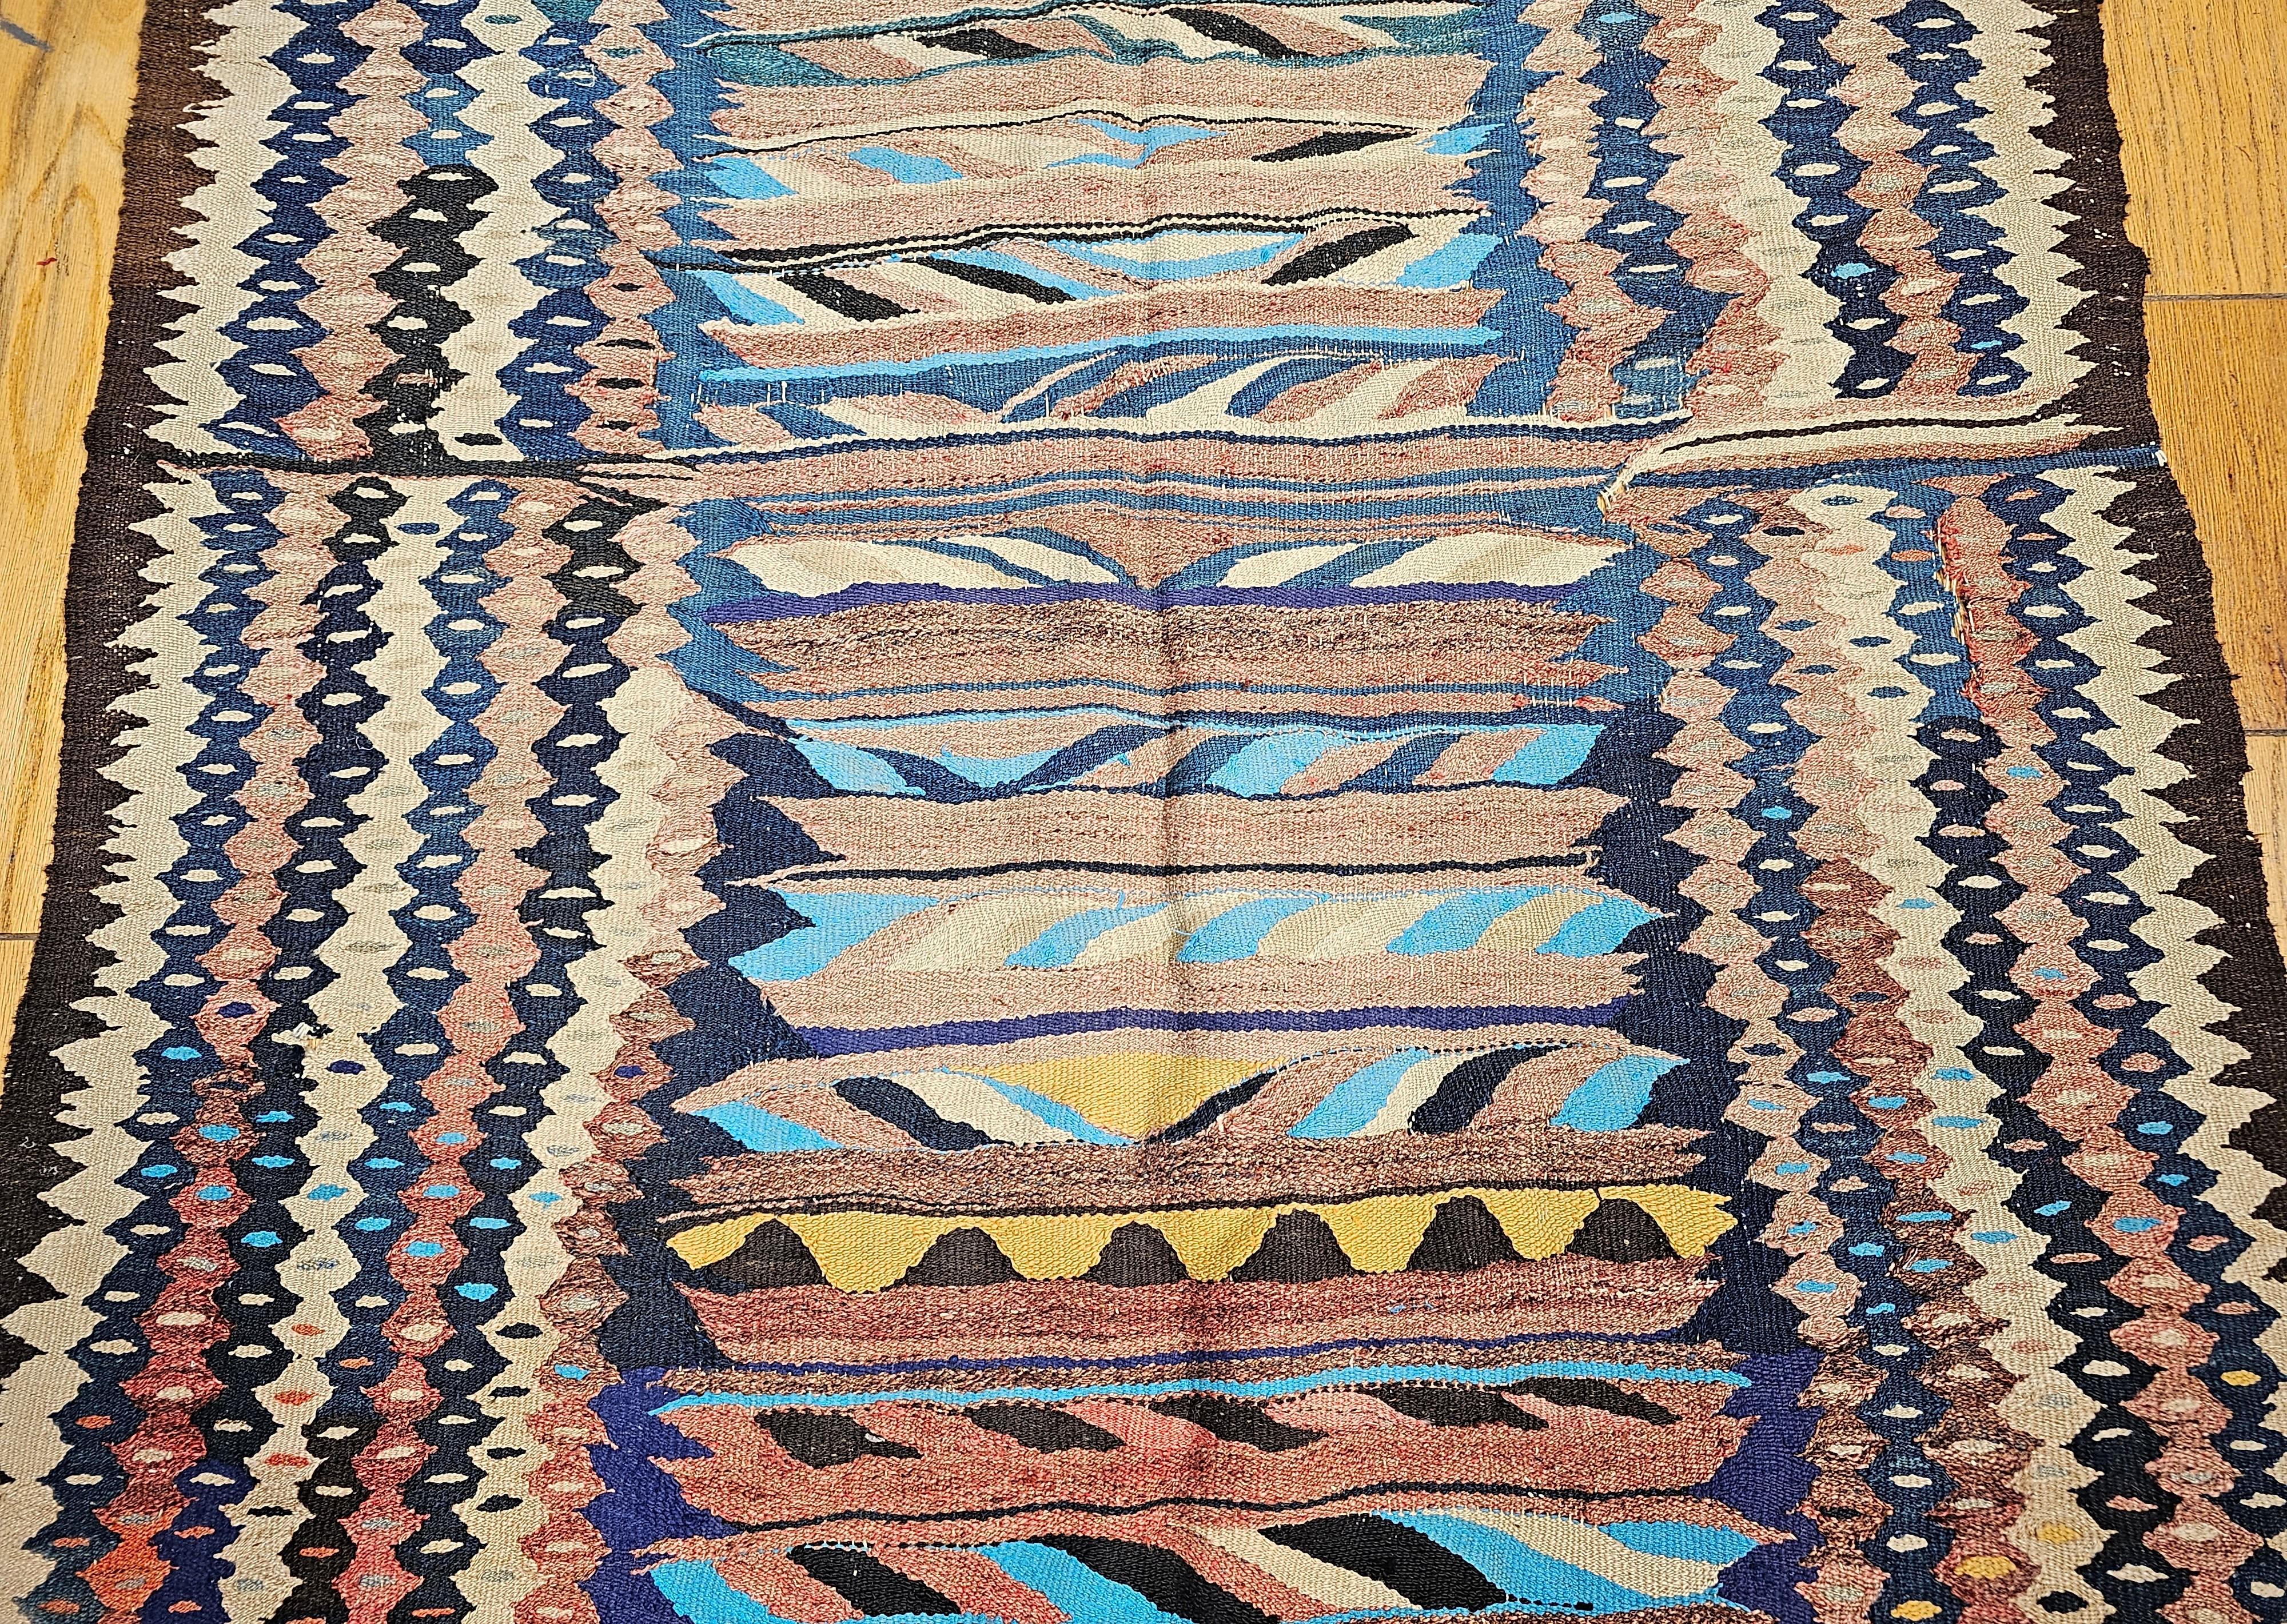 Vintage Kurdish Tapestry Kilim in Turquoise, Aqua, Green, Yellow, Red, Navy In Good Condition For Sale In Barrington, IL